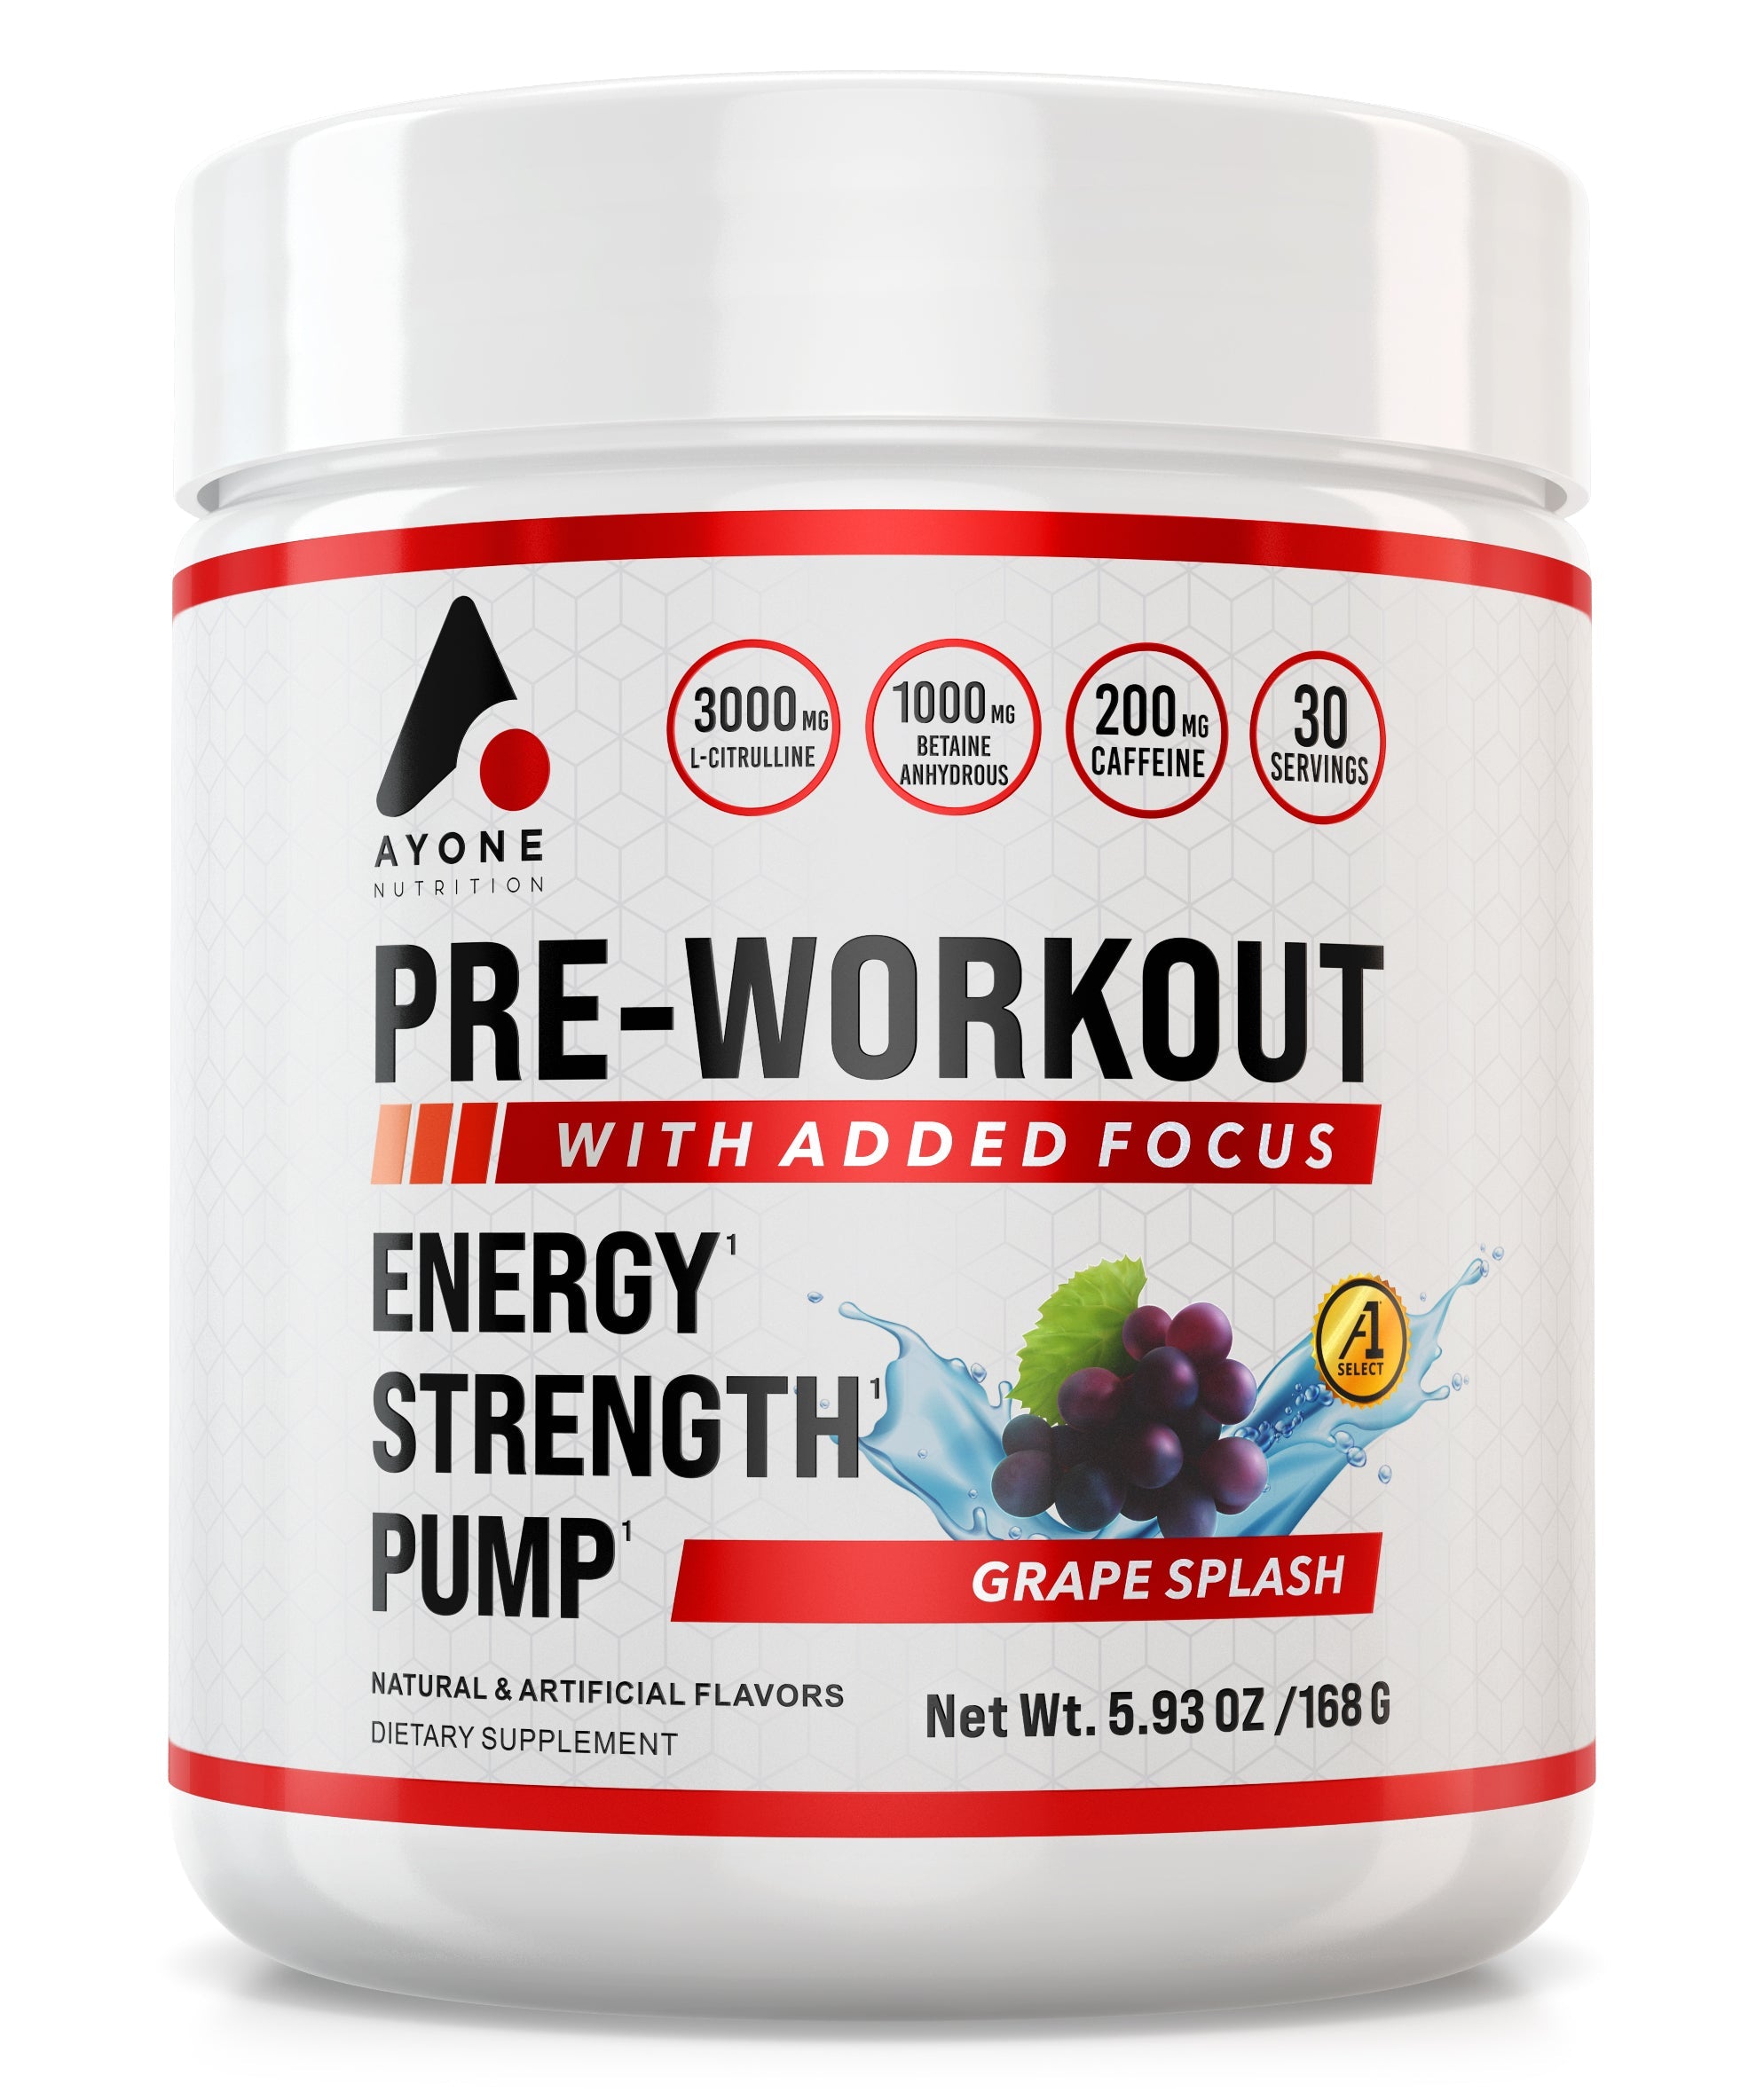 » Ayone Nutrition Pre-Workout (100% off) - A1 Supplements Store